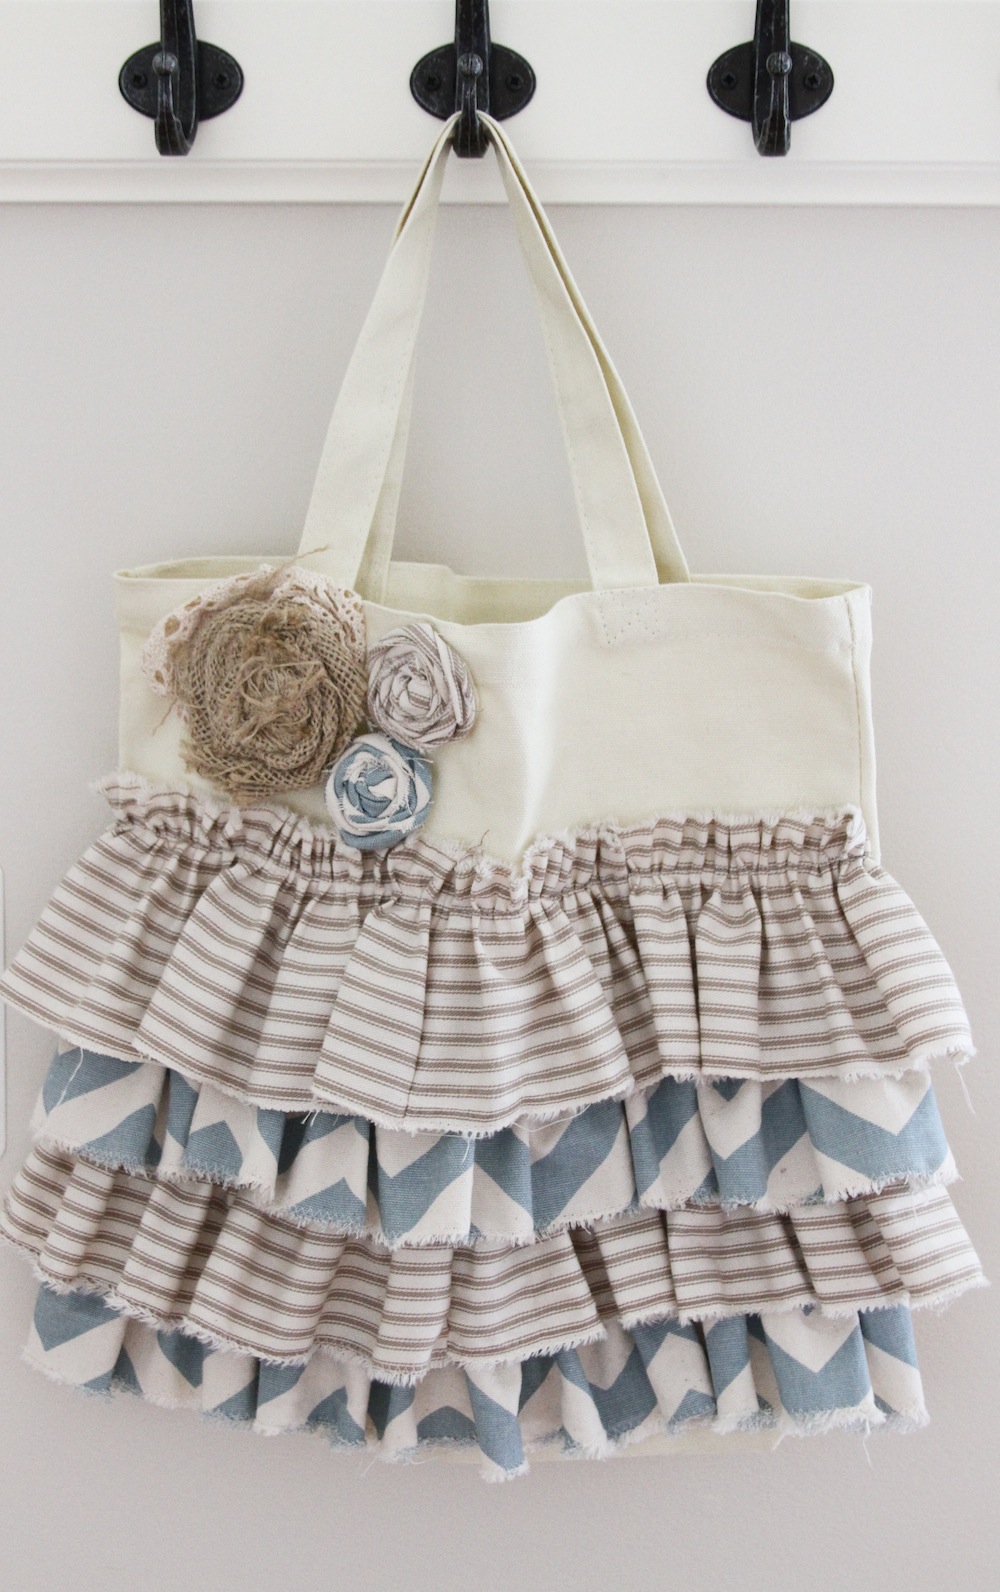 Ruffled Tote Tutorial by Blue Robin Cottage